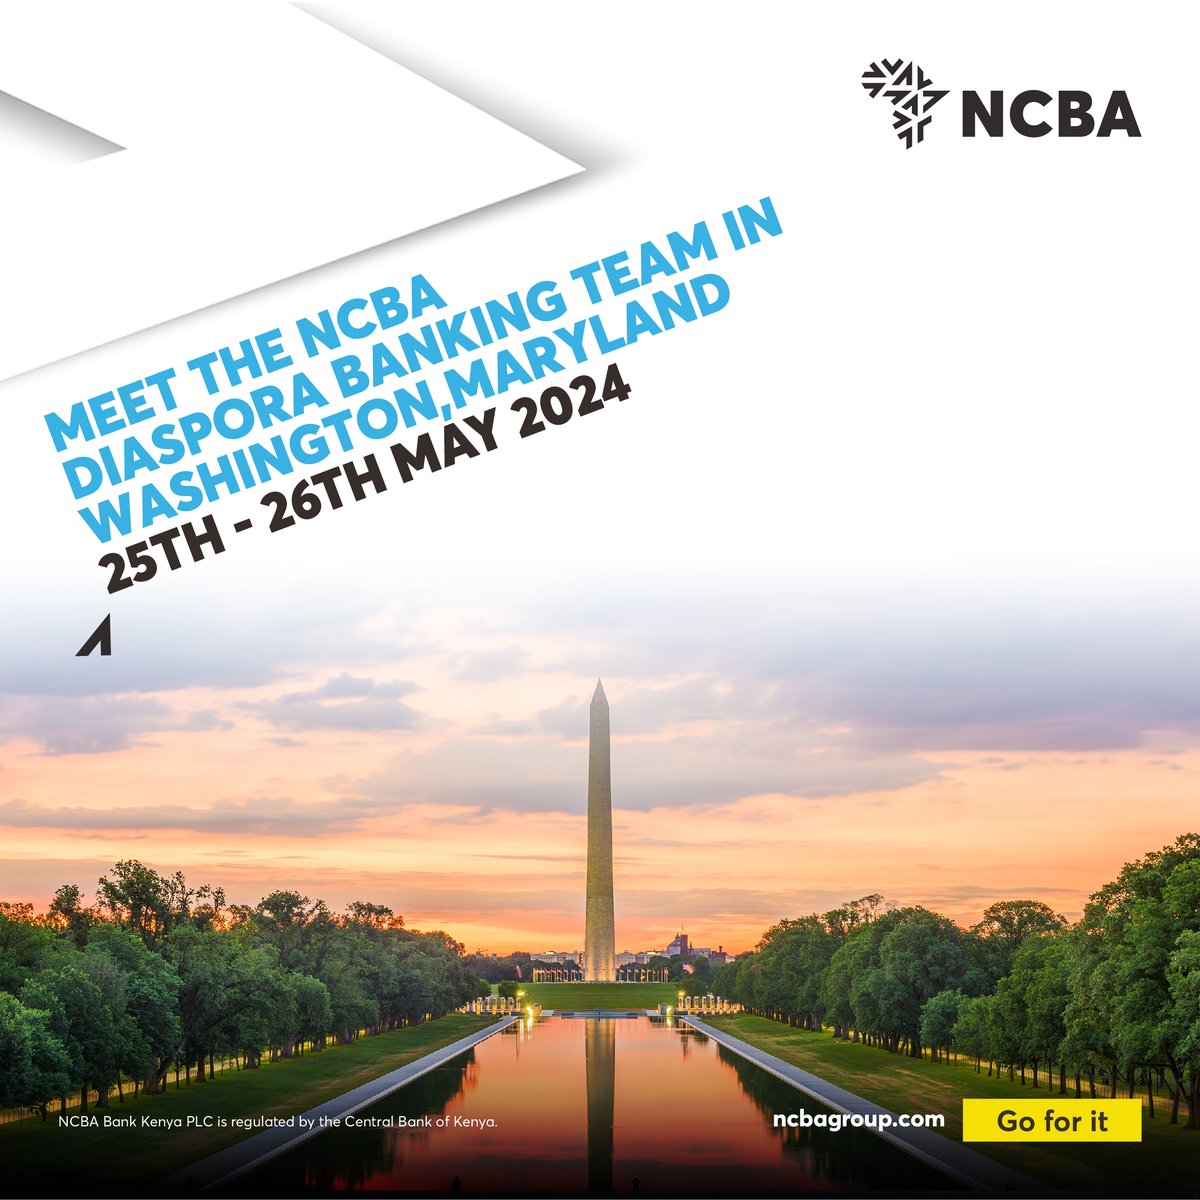 Exciting news! Our Diaspora banking team will be in Washington, Maryland on 25-26 May 2024 to discuss your financial needs. Email us at diasporabankingteam@ncbagroup.com or WhatsApp/call +254750959848 / +254794142009. #NCBATwendeMbele #GoForIt #NCBADiaspora